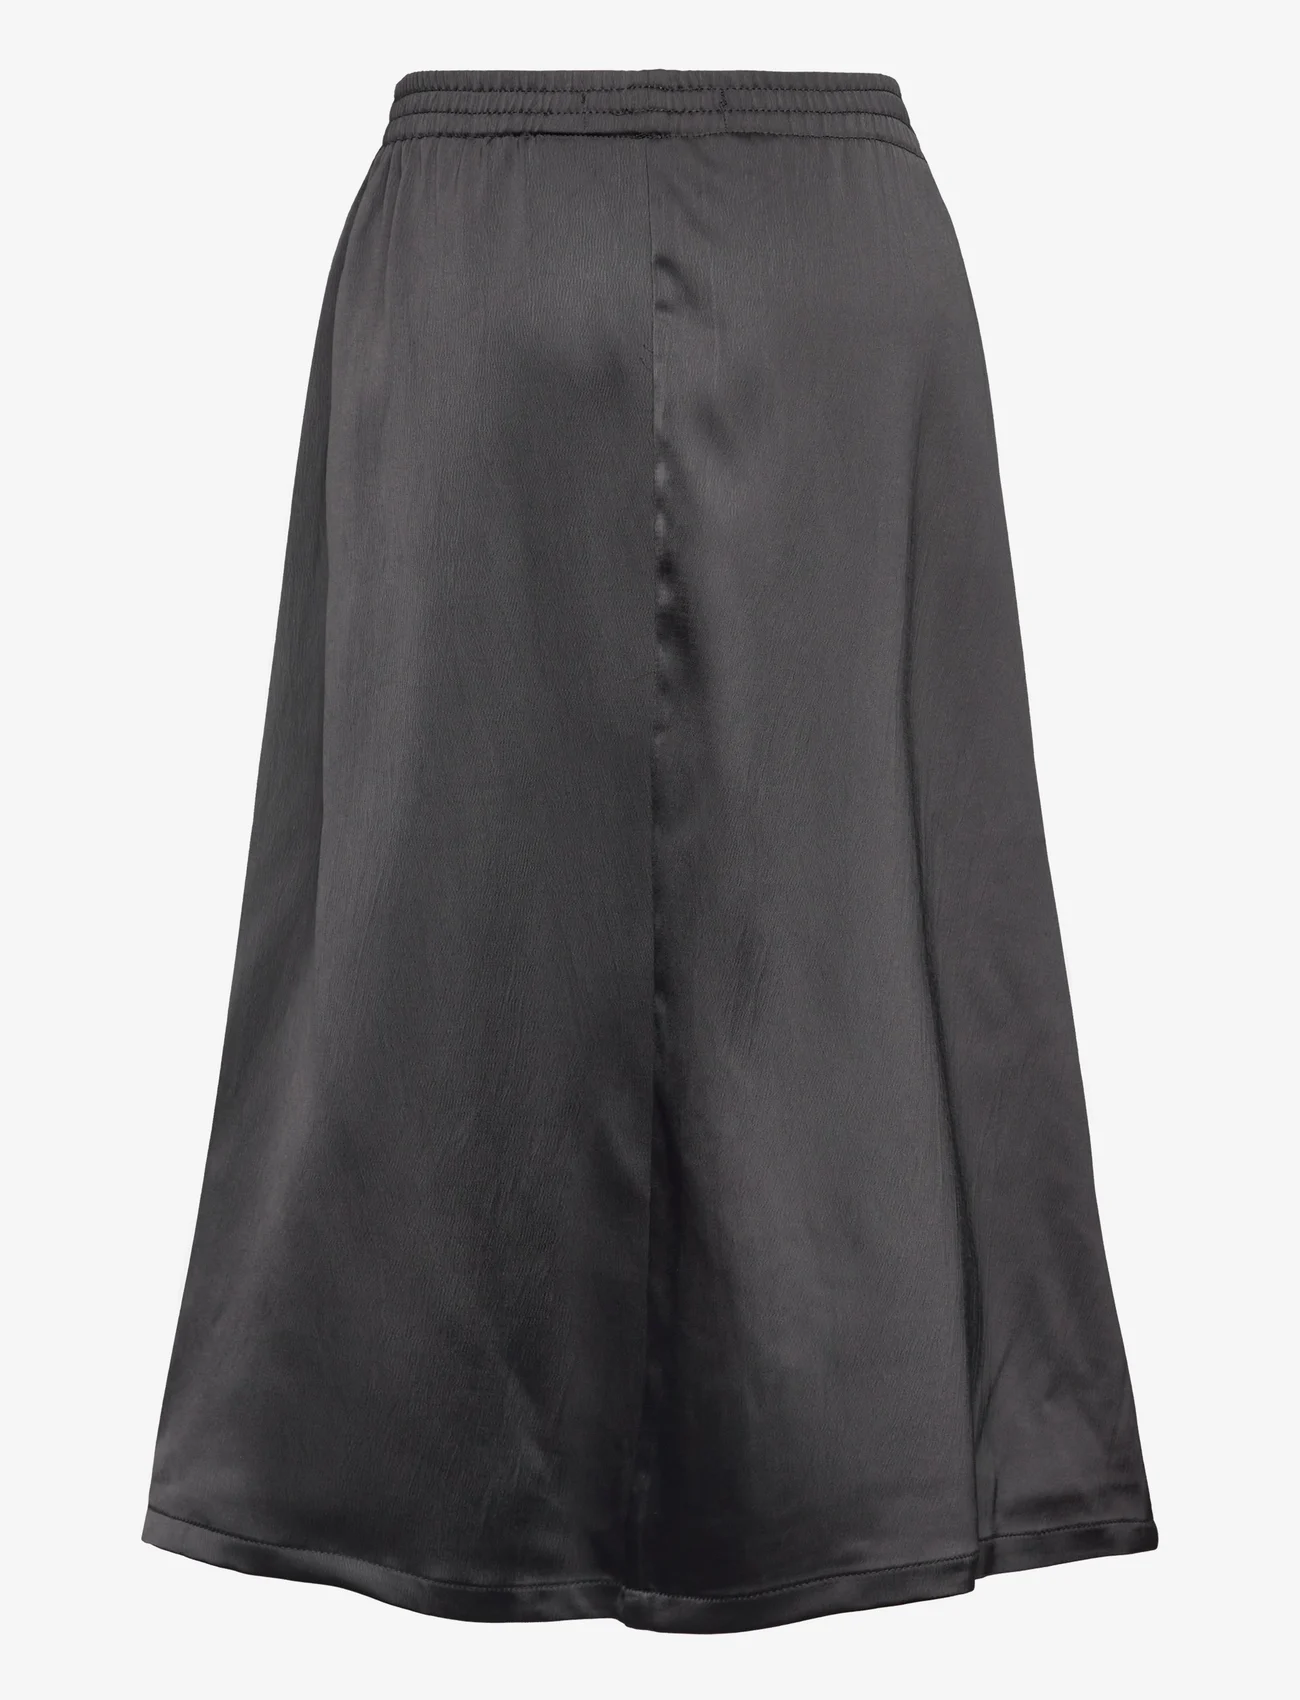 Sofie Schnoor Young - Skirt - maxi skirts - black - 1